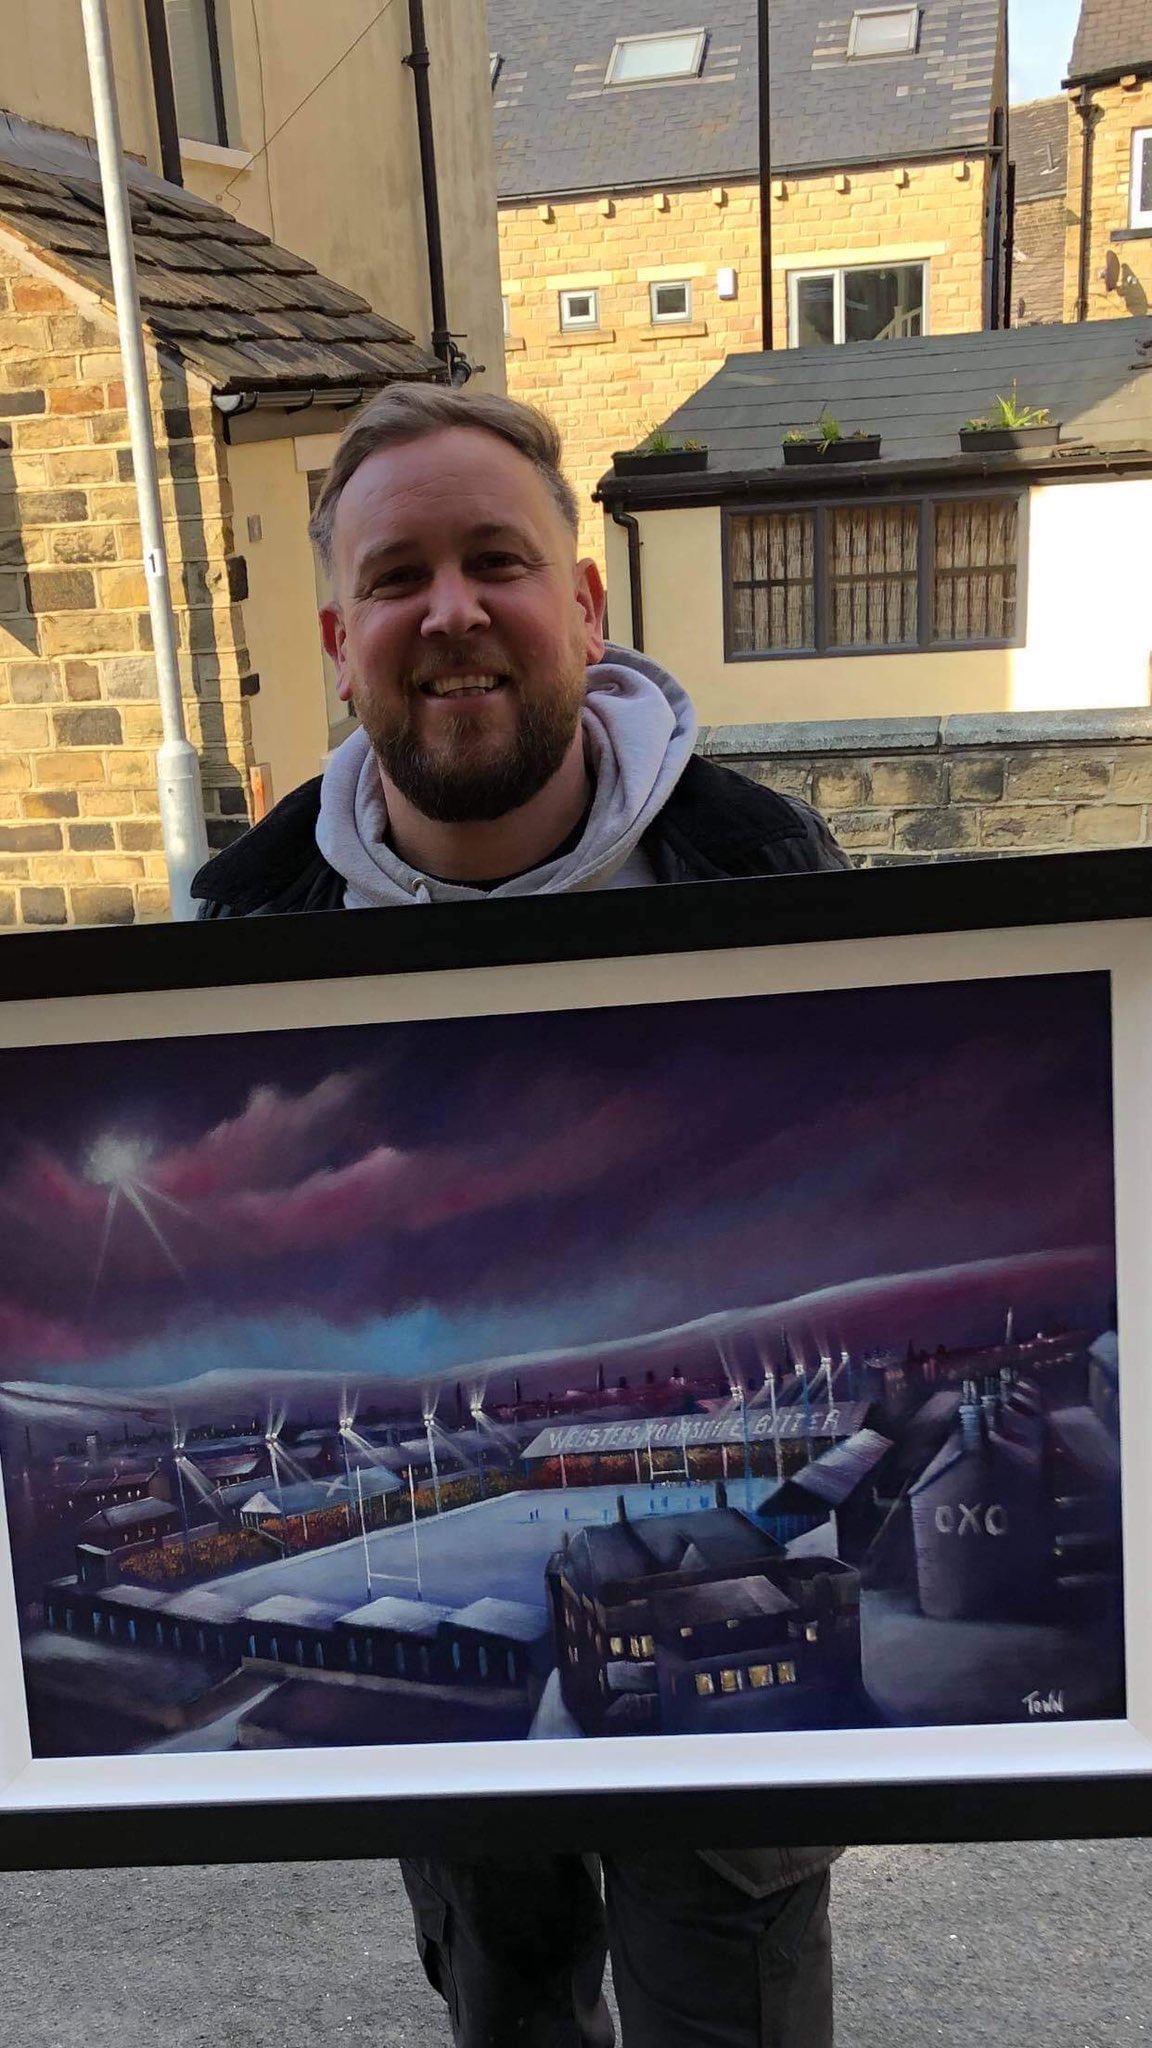 Stadium Portraits By Paul Town On Twitter Another Happy Customer With